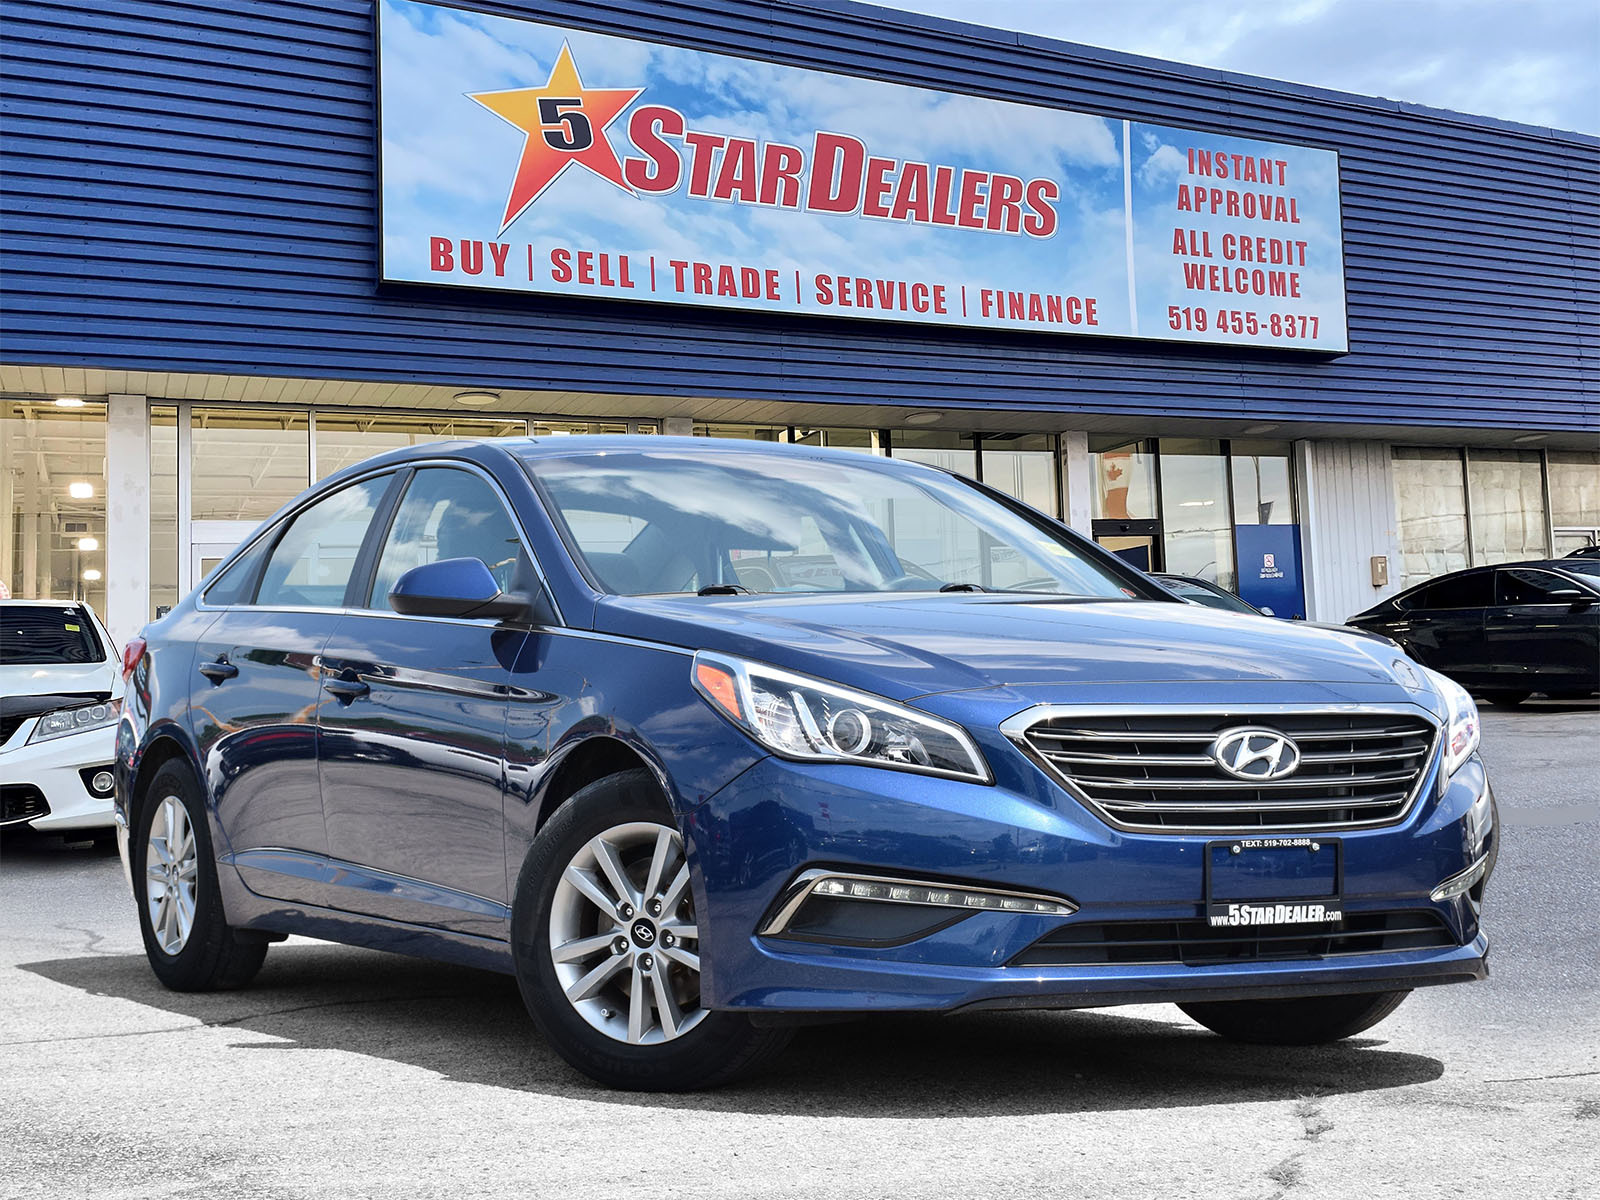 2015 Hyundai Sonata EXCELLENT CONDITION LOADED! WE FINANCE ALL CREDIT